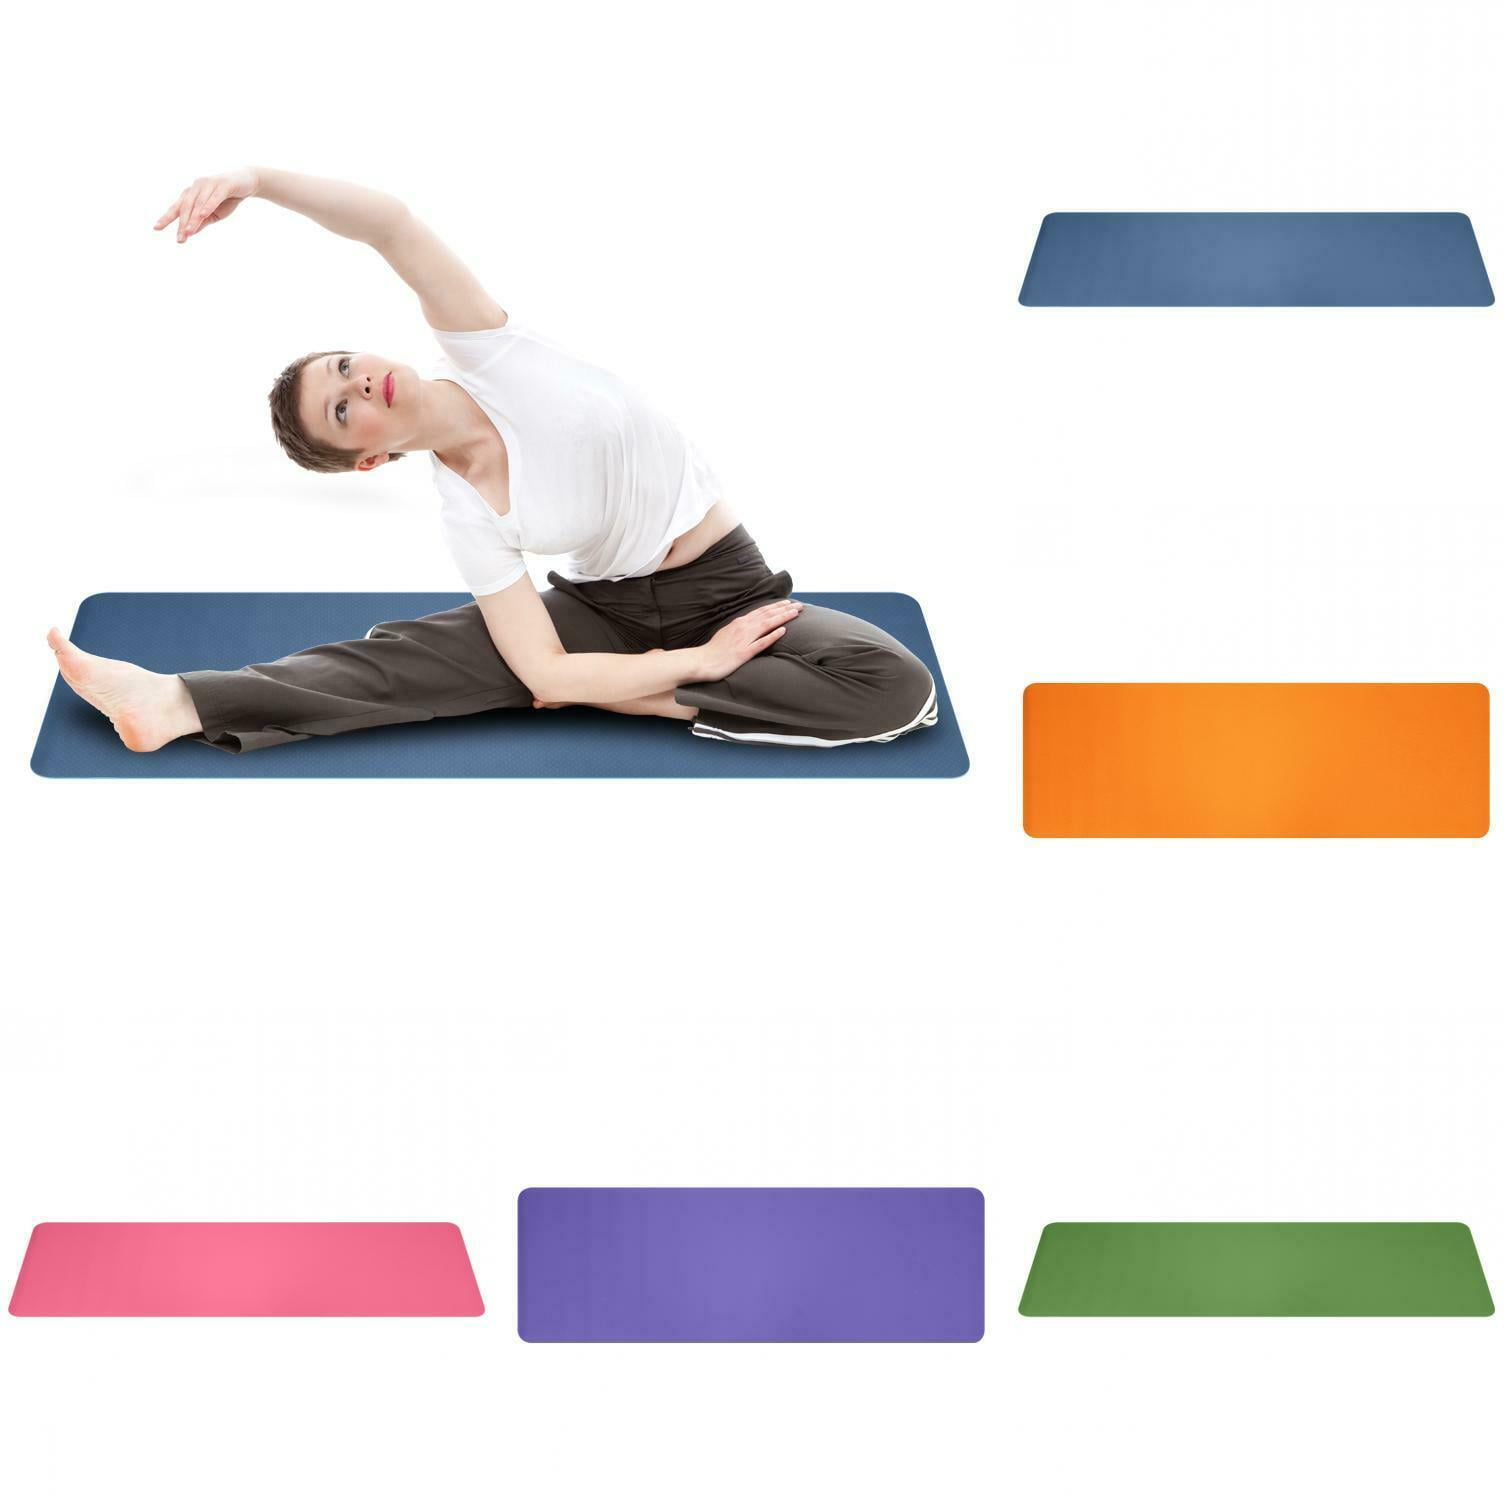 Yoga Mat 6mm Non slip Exercise Mat Pilates Fitness Gym Home Excercise with Bag 